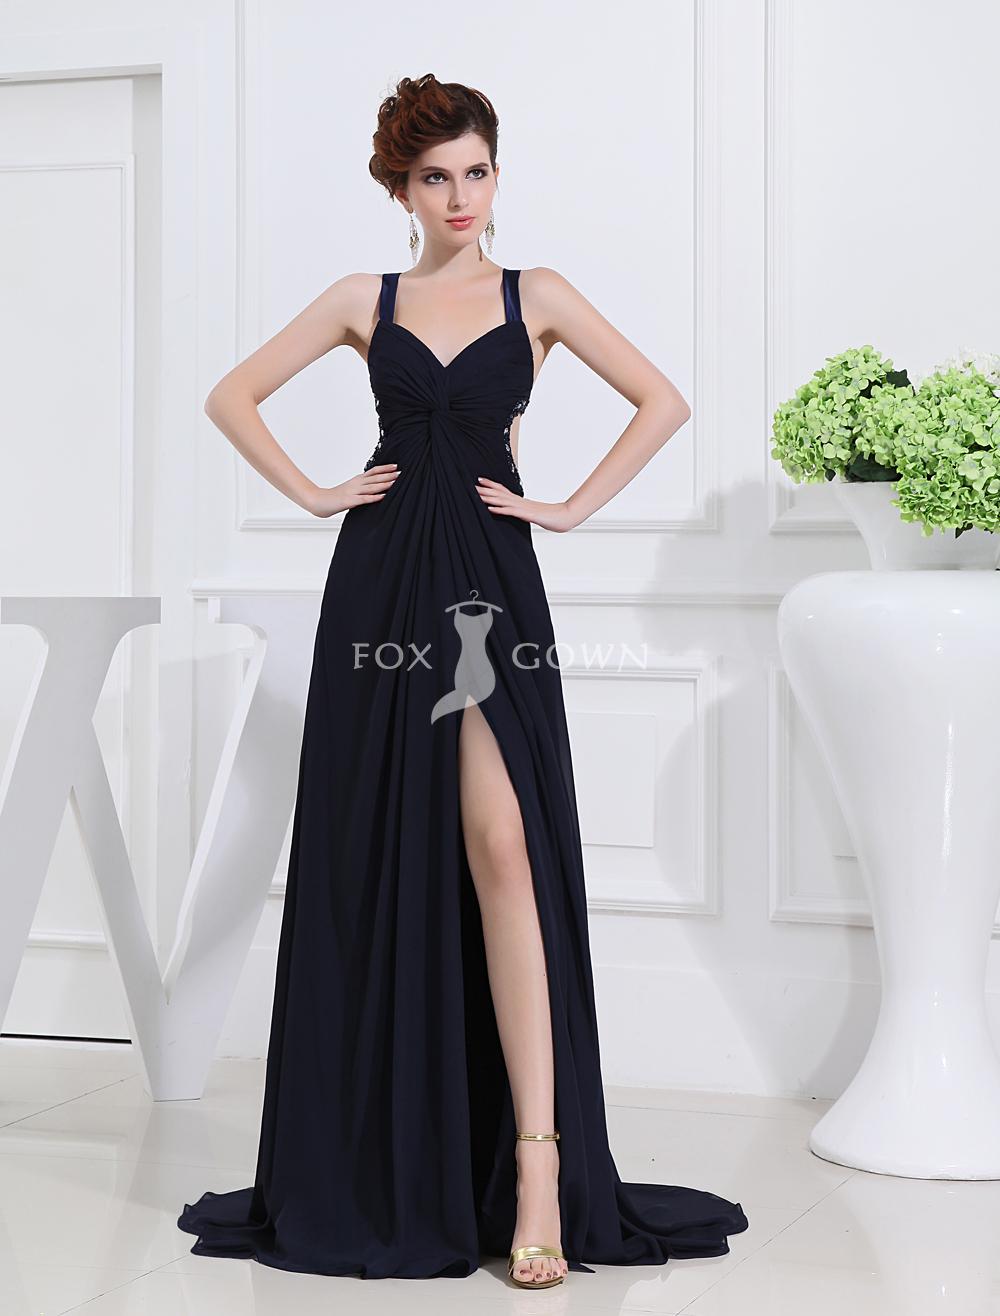 Floor Length Dress With Slit & 2017-2018 Fashion Trend